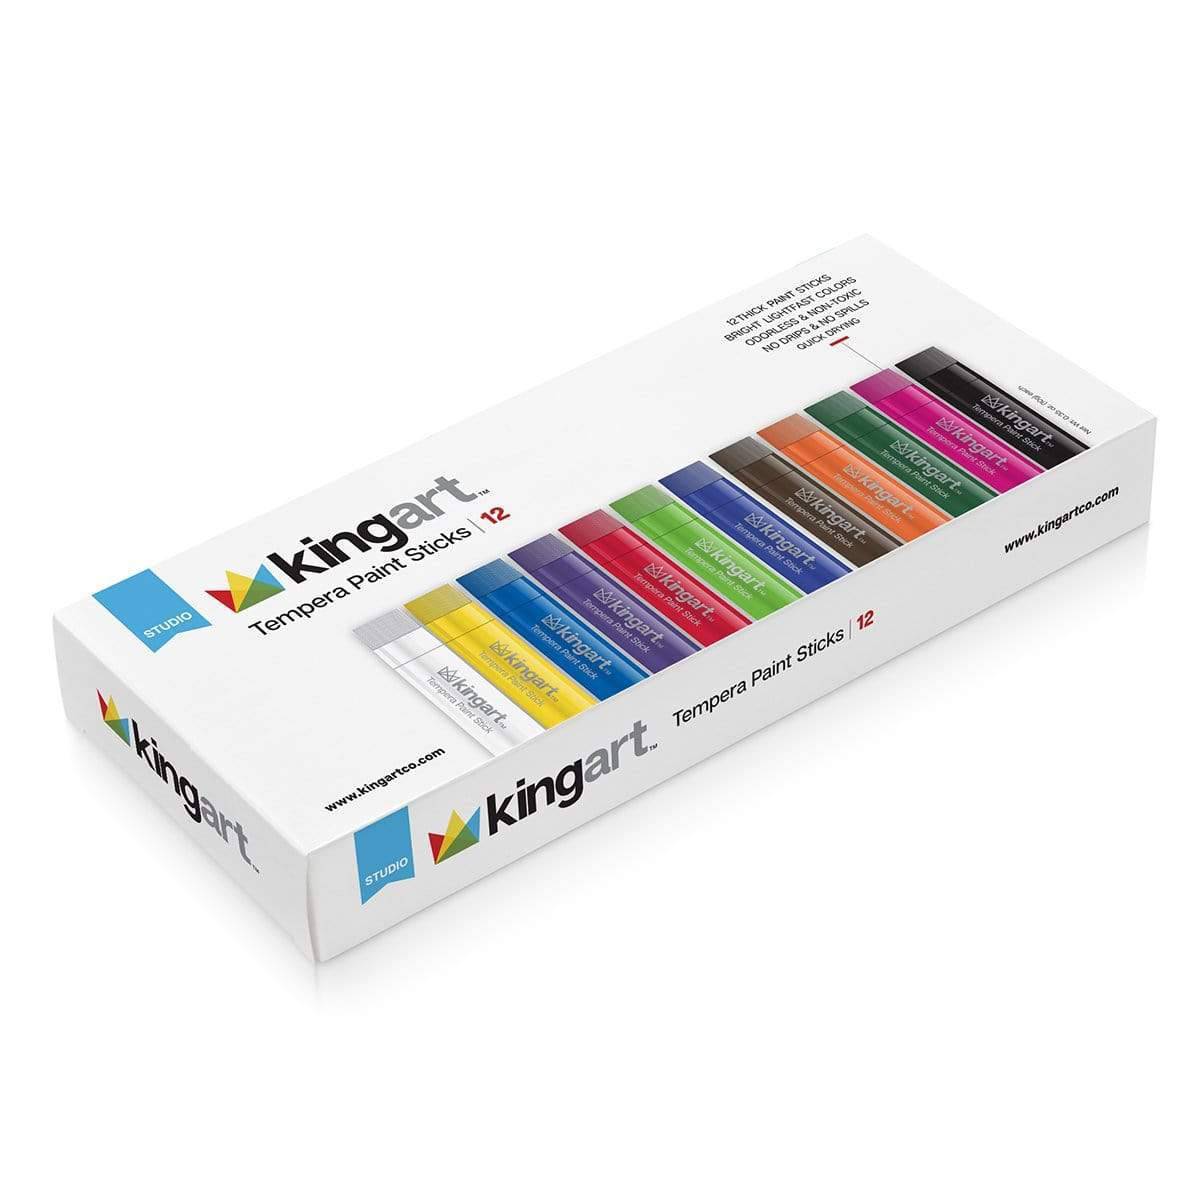 Noted by Post-it Pen Set, Cool Colors, Periwinkle, Yellow, Mint, Glitter  Gel, 3 Pens 